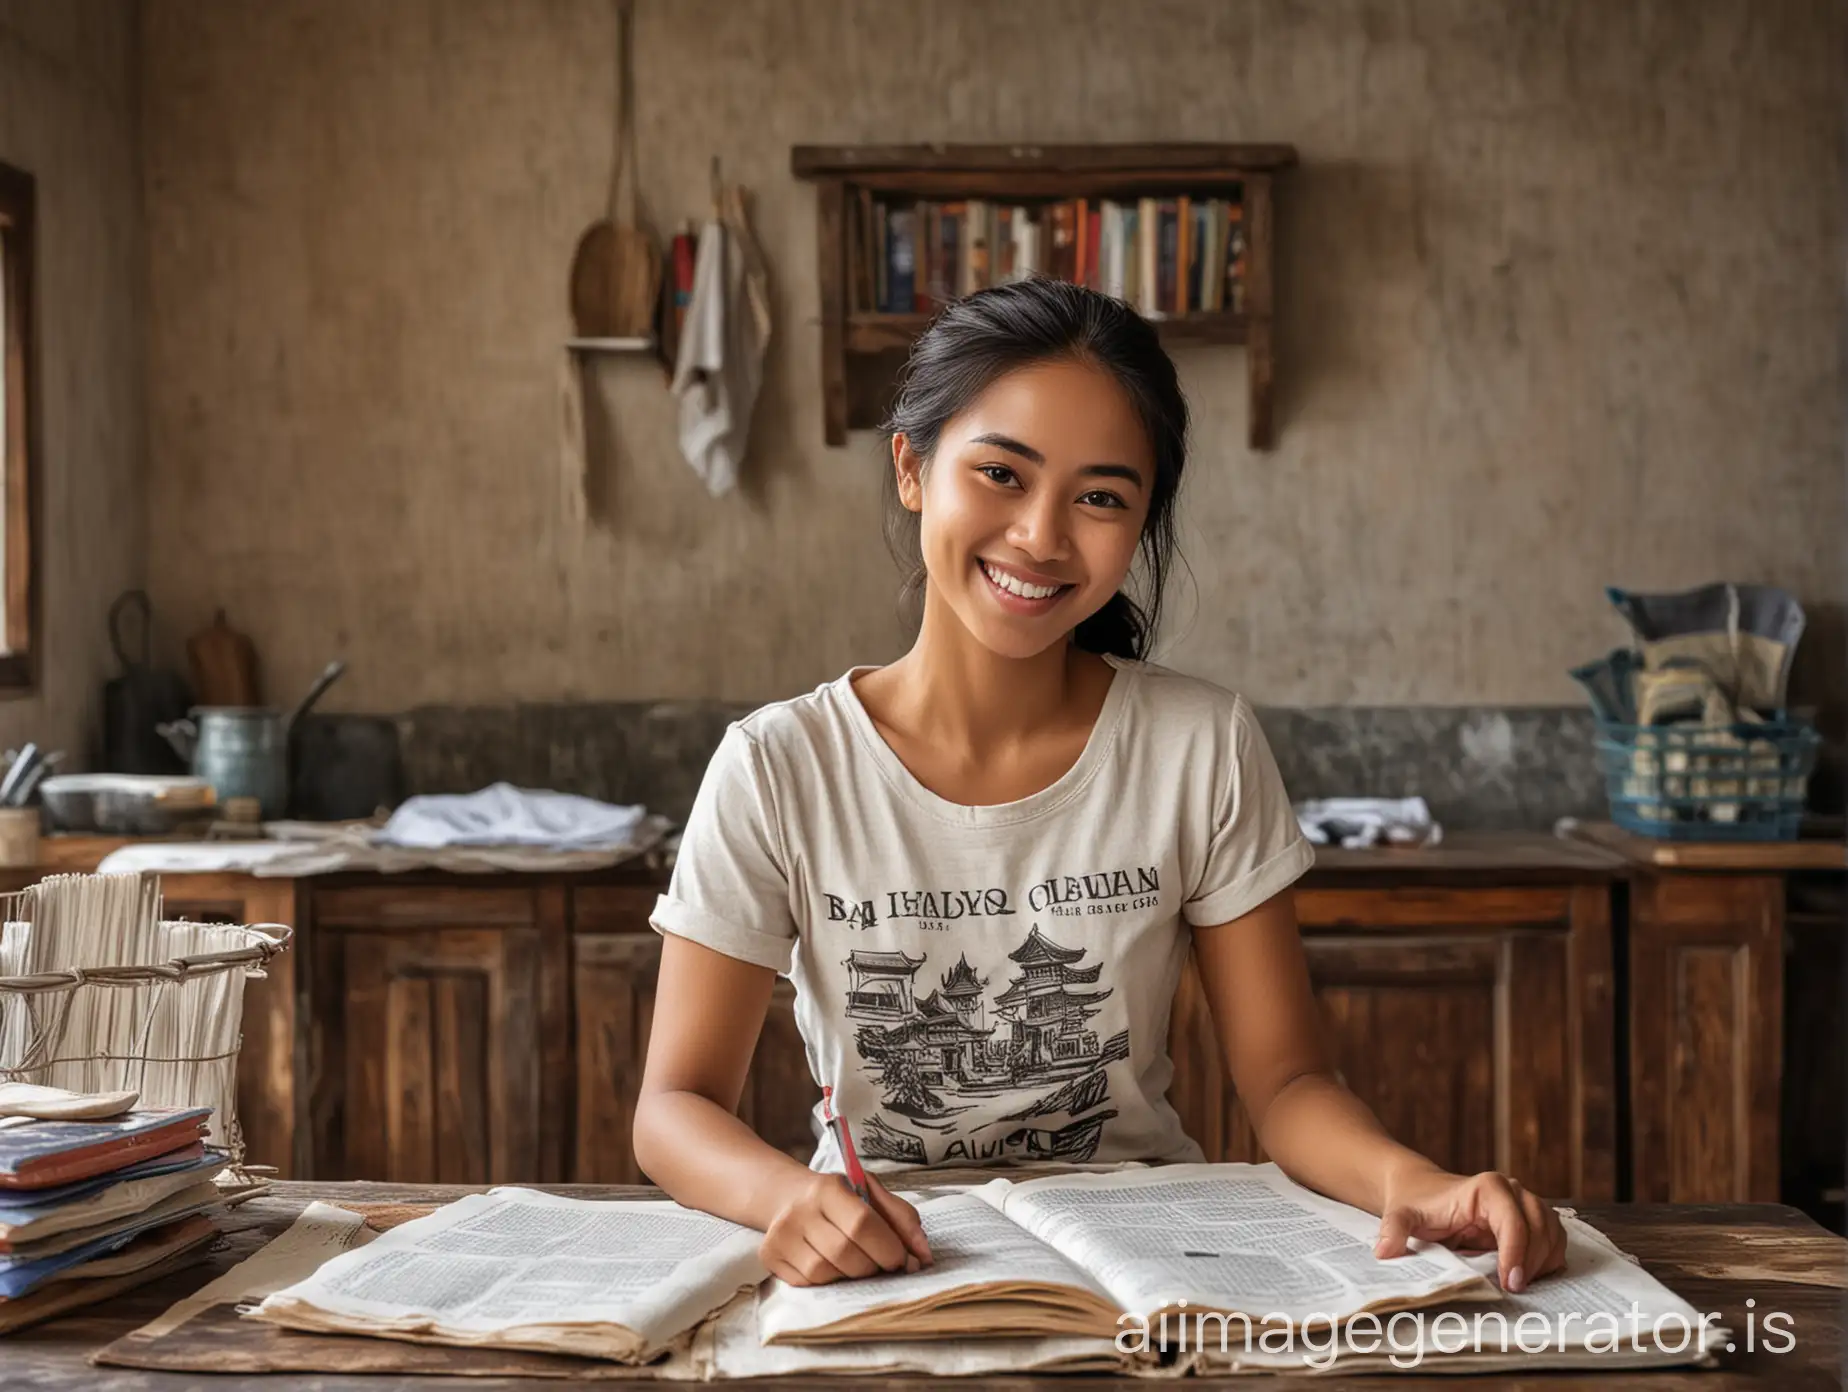 Young-Balinese-Woman-Studying-Books-in-Bali-TShirt-Surrounded-by-Household-Chores